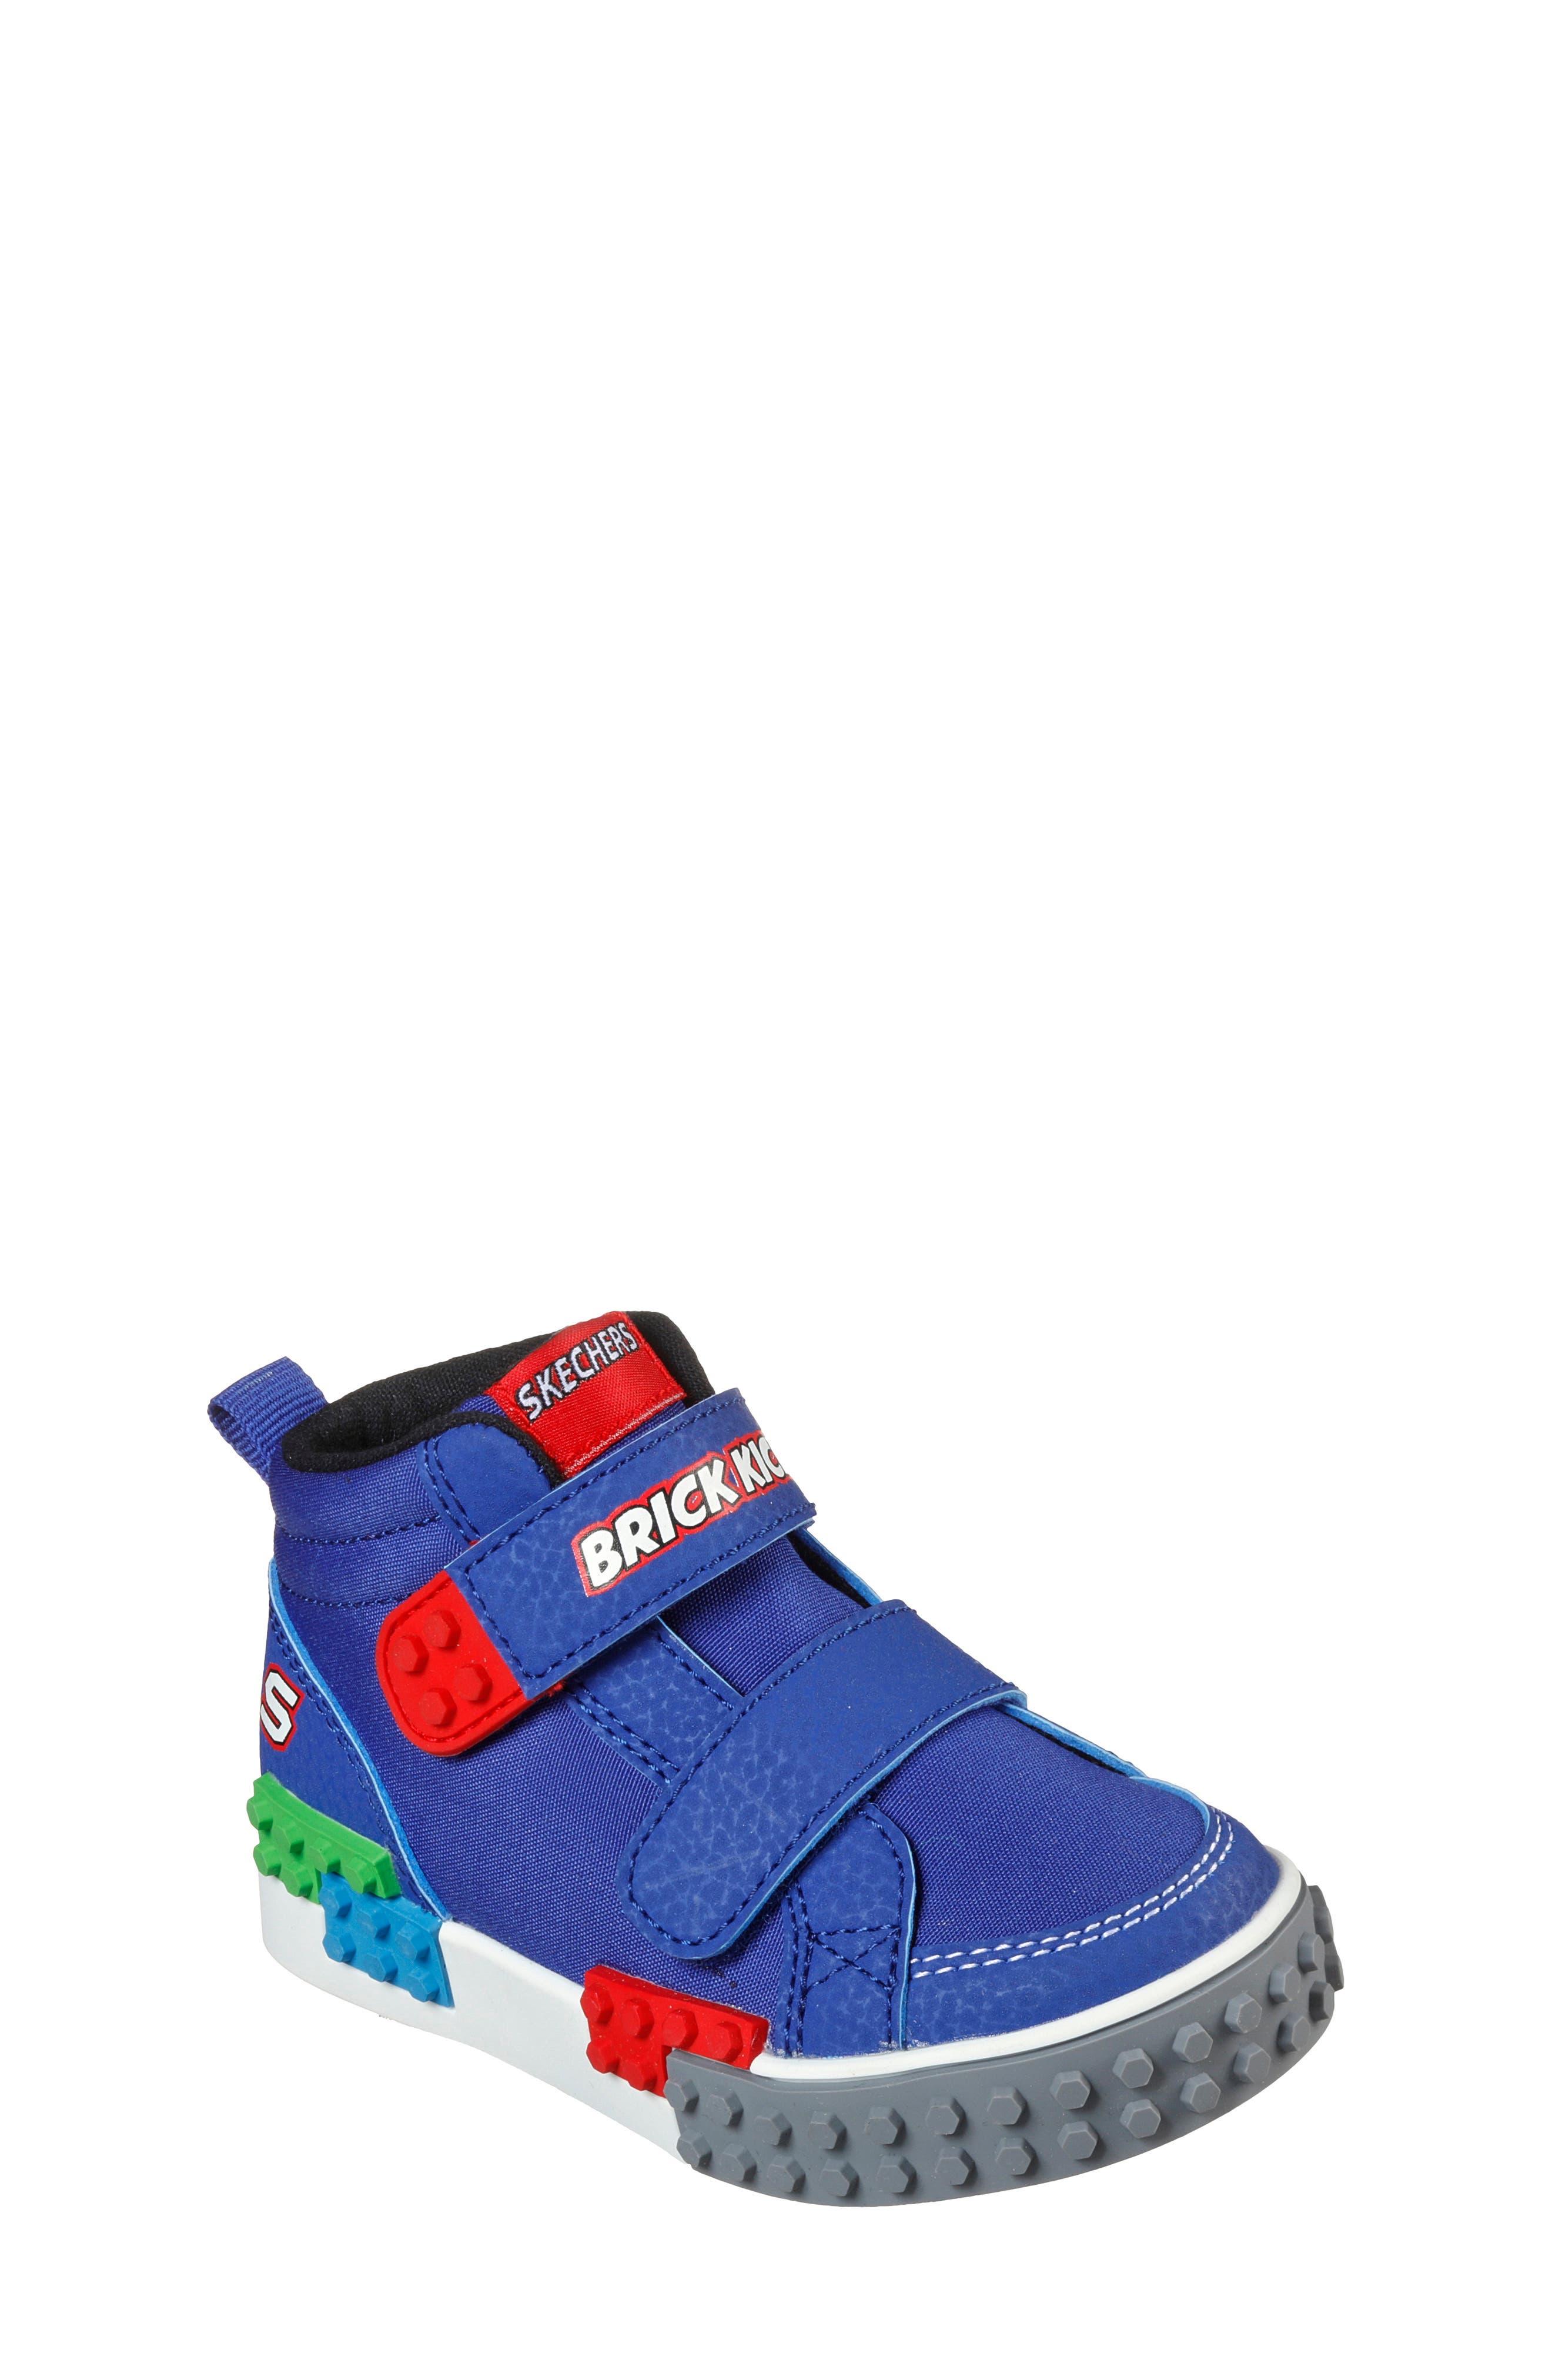 Toddler Boys' SKECHERS Shoes (Sizes 7.5-12)